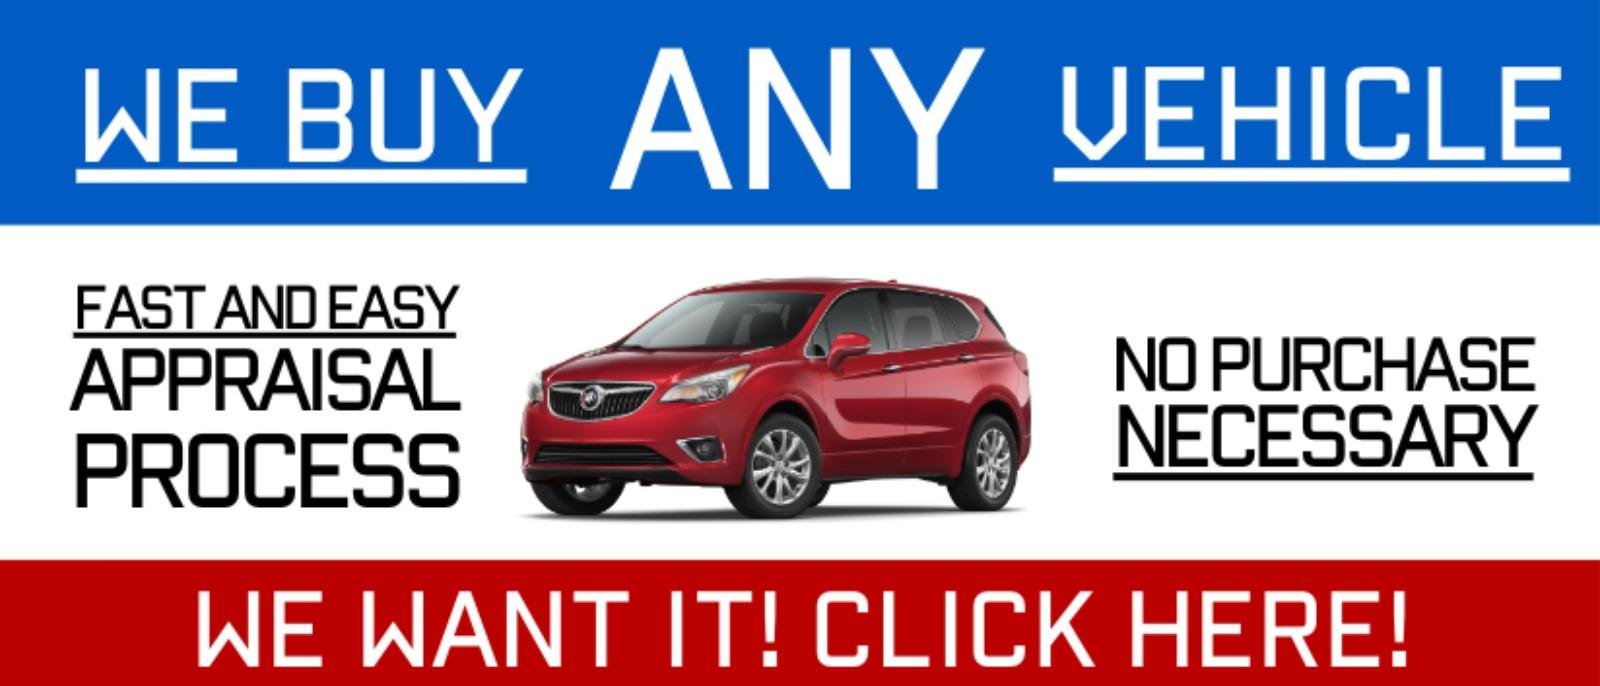 Dave Sinclair Buick GMC wants to buy your vehicle! Inquire today!